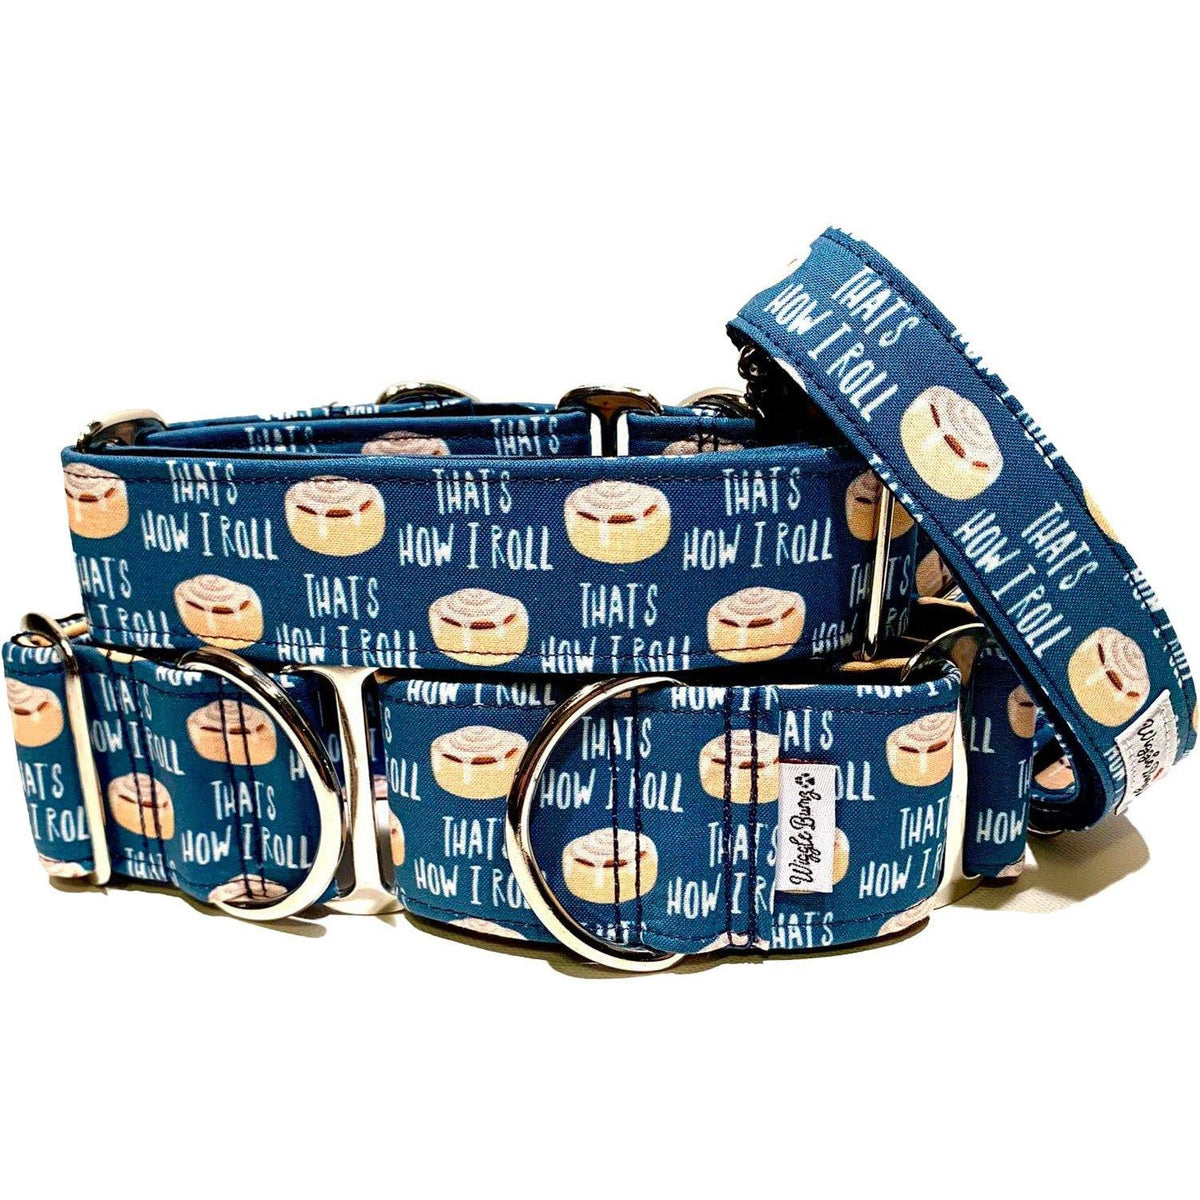 Cinnamon Buns Dog Collar by Big Paw Shop featuring a whimsical design on cotton fabric